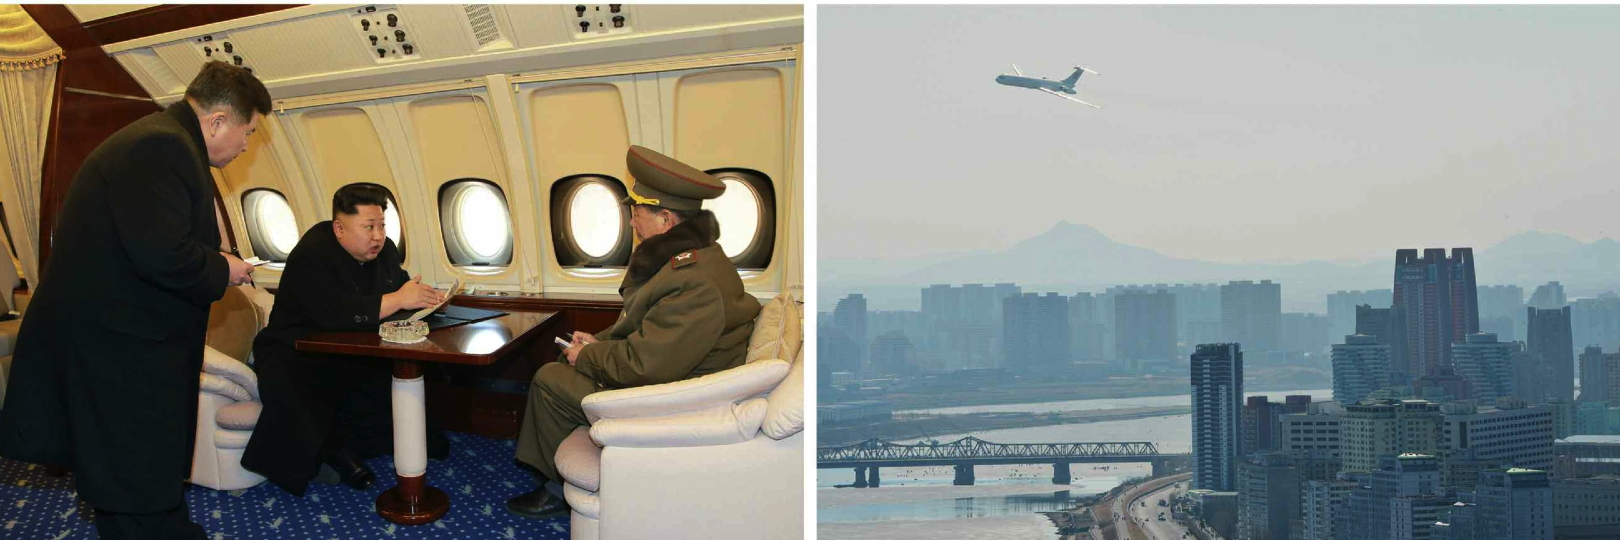 Kim Jong Un discusses the construction of Mirae Scientists Street on his personal plane with Han Kwang Sang (Director of the WPK Finance and Accounting Department) and VMar Hwang Pyong So (Photos: Rodong Sinmun).